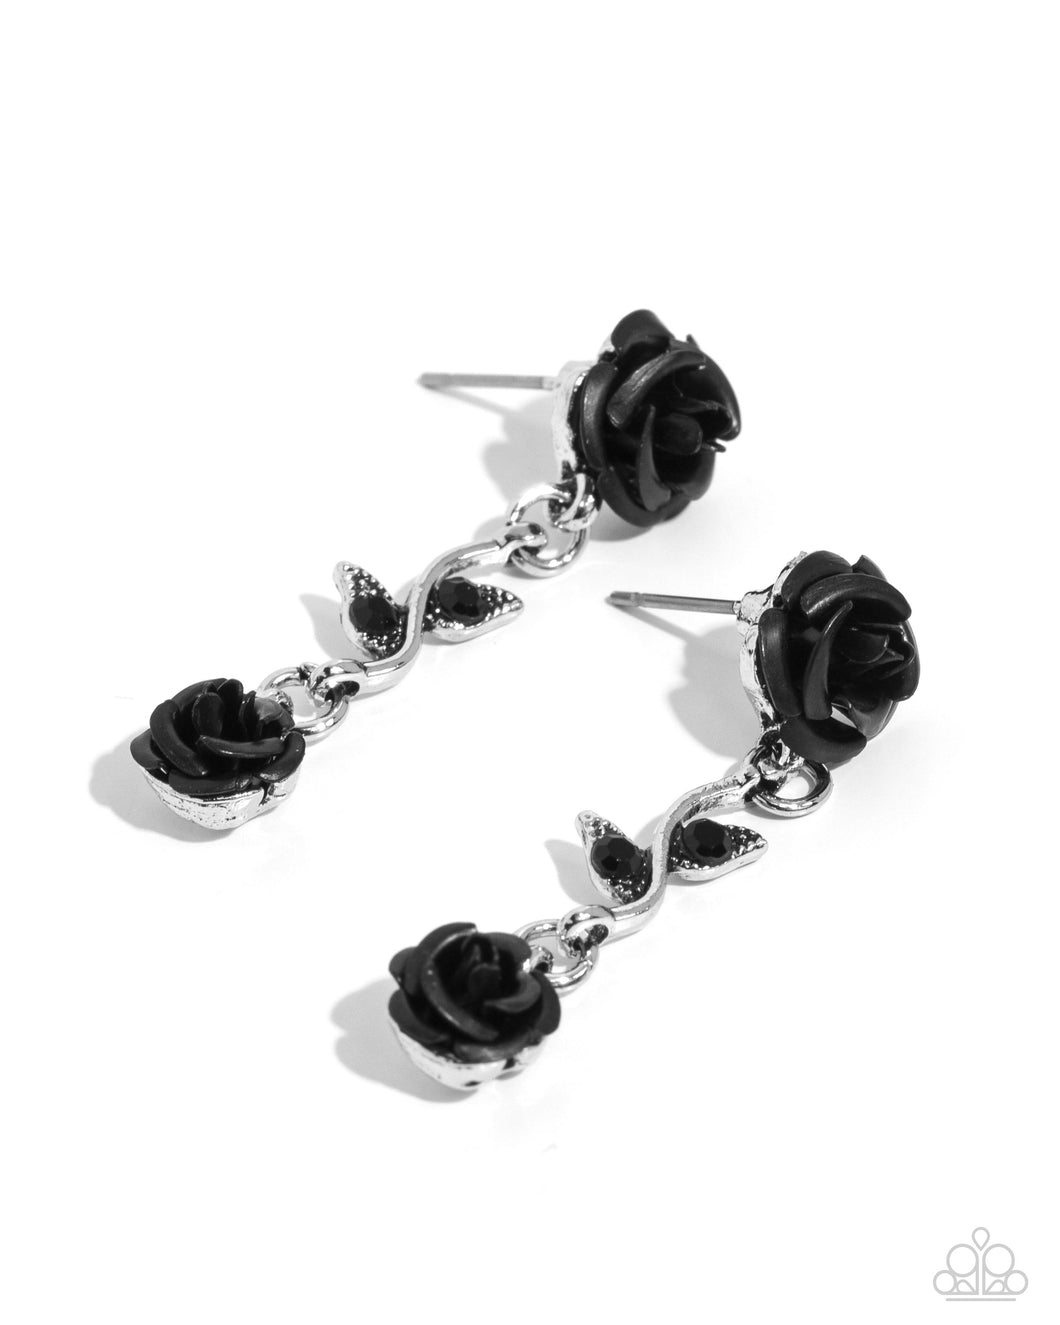 oak-sisters-jewelry-led-by-the-rose-black-post earrings-paparazzi-accessories-by-lisa